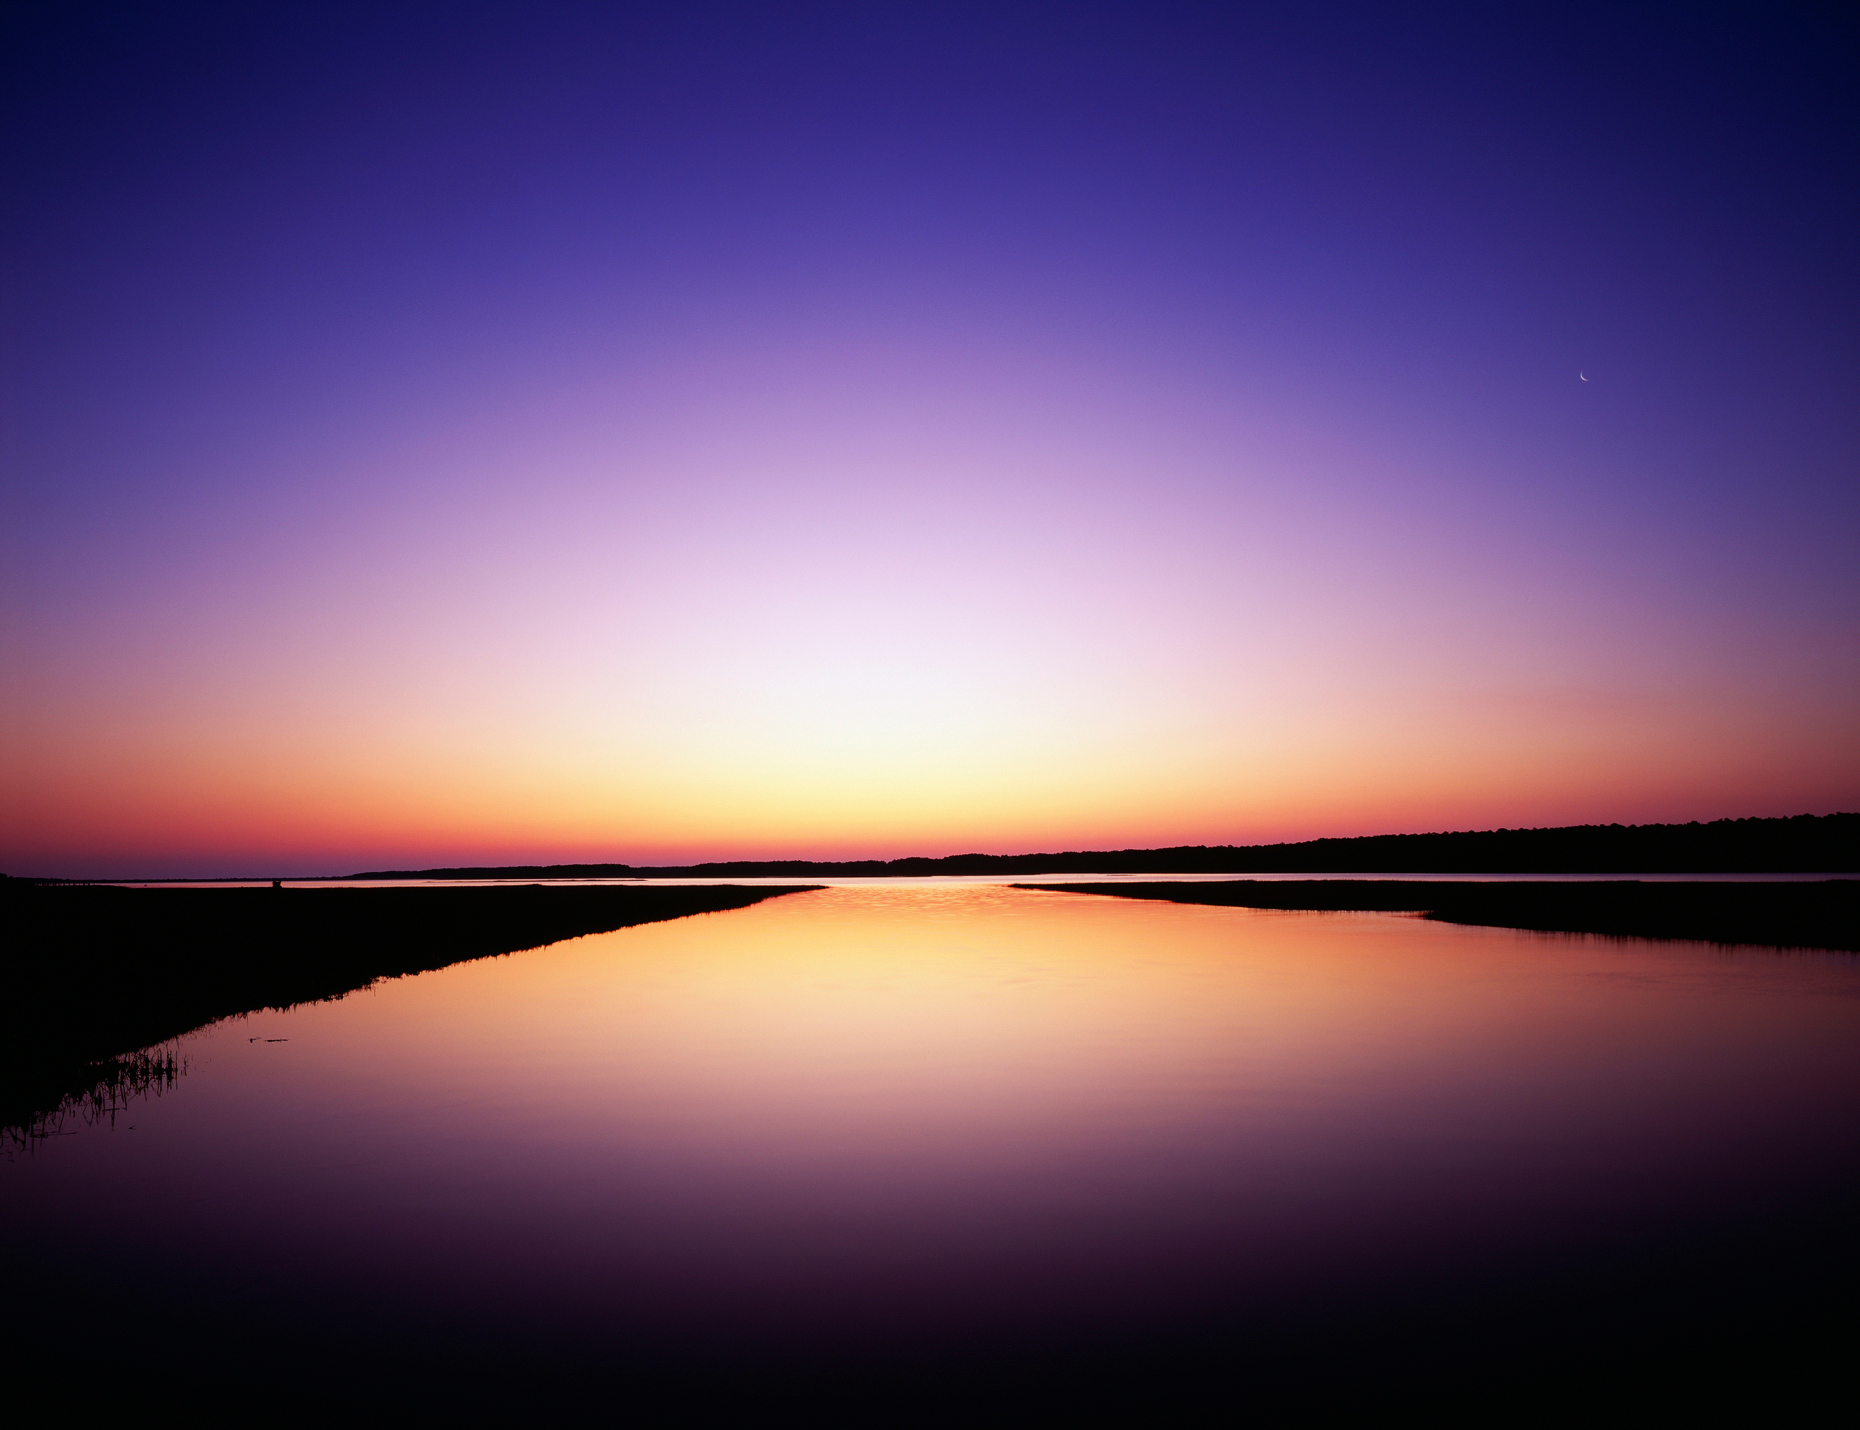 Sunrise sky reflected in the bay at Chincoteague National Wildli